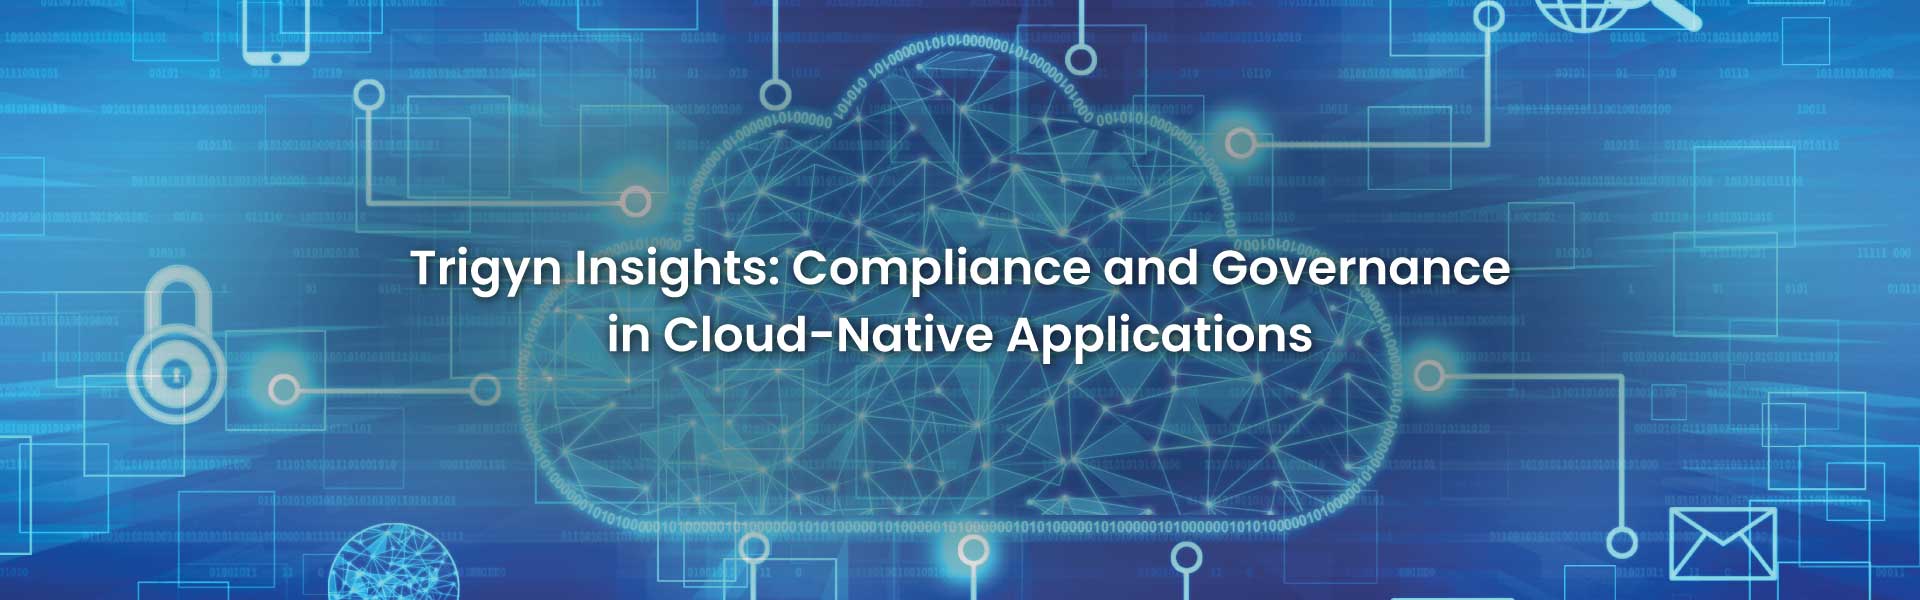 Governance of Cloud-Native Applications